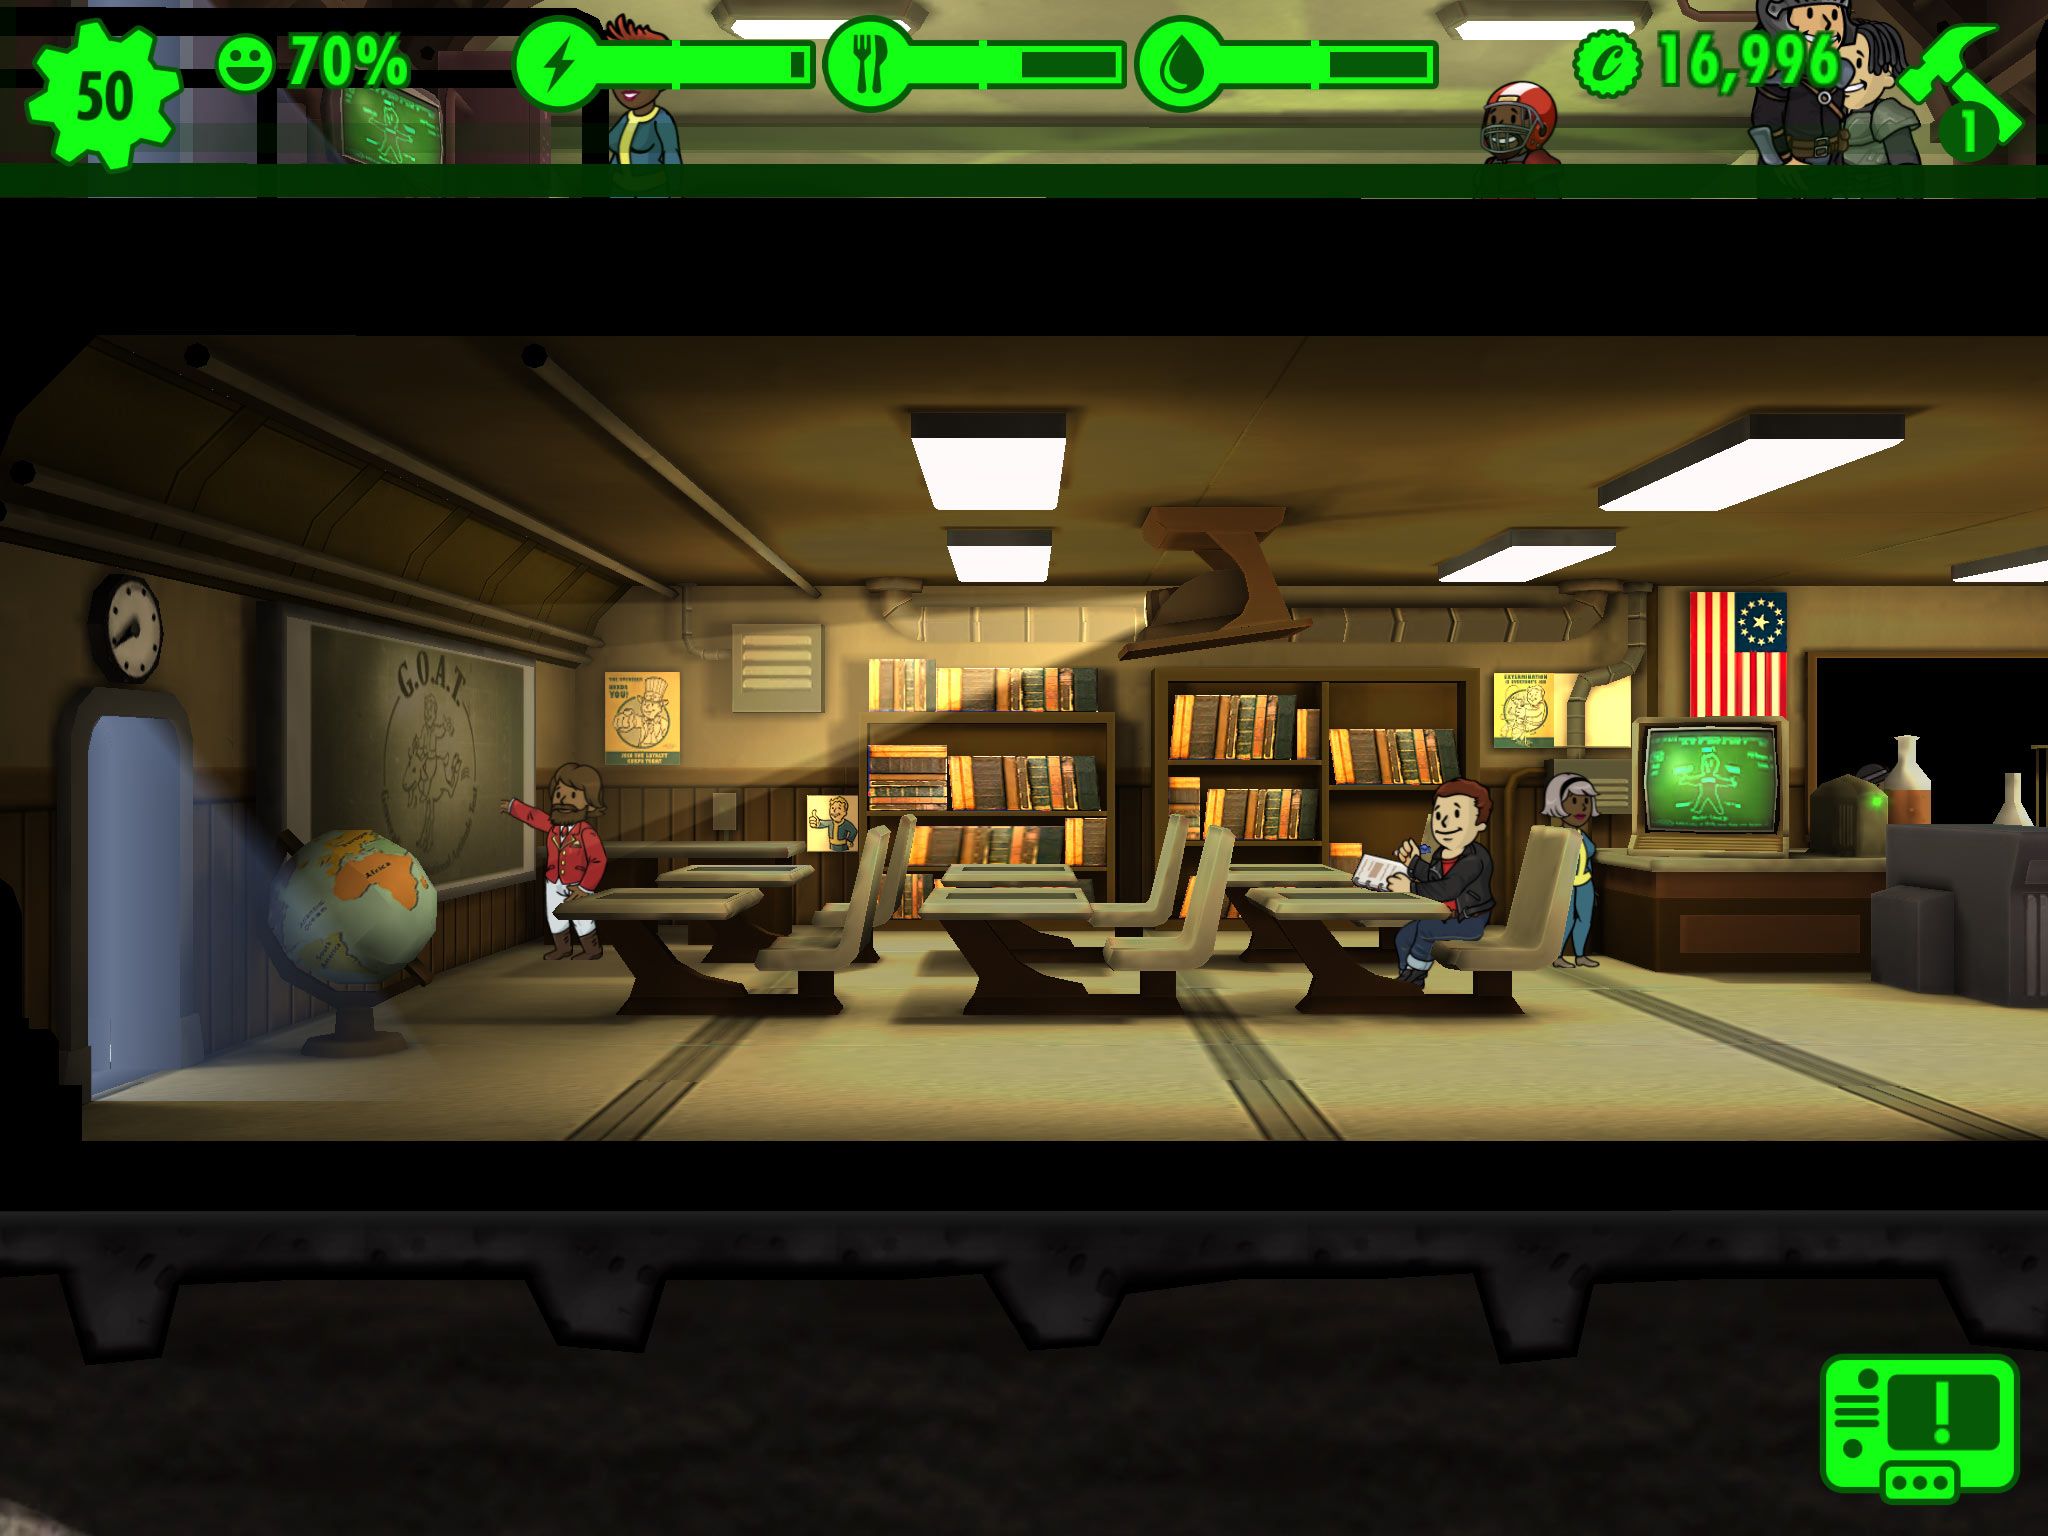 fallout shelter black screen android